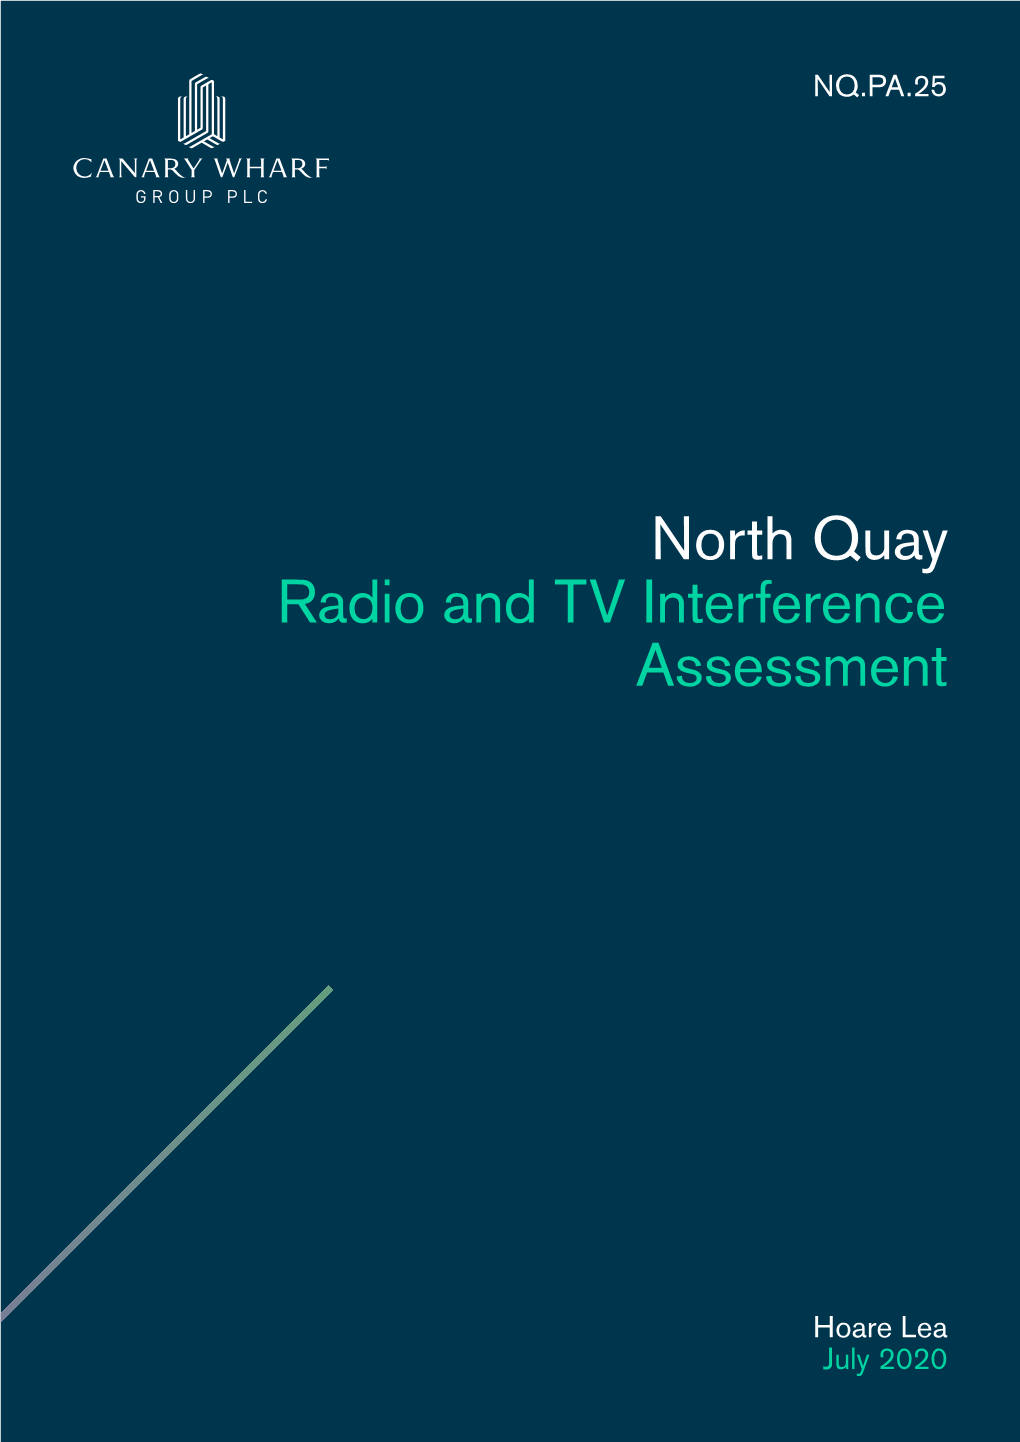 North Quay Radio and TV Interference Assessment